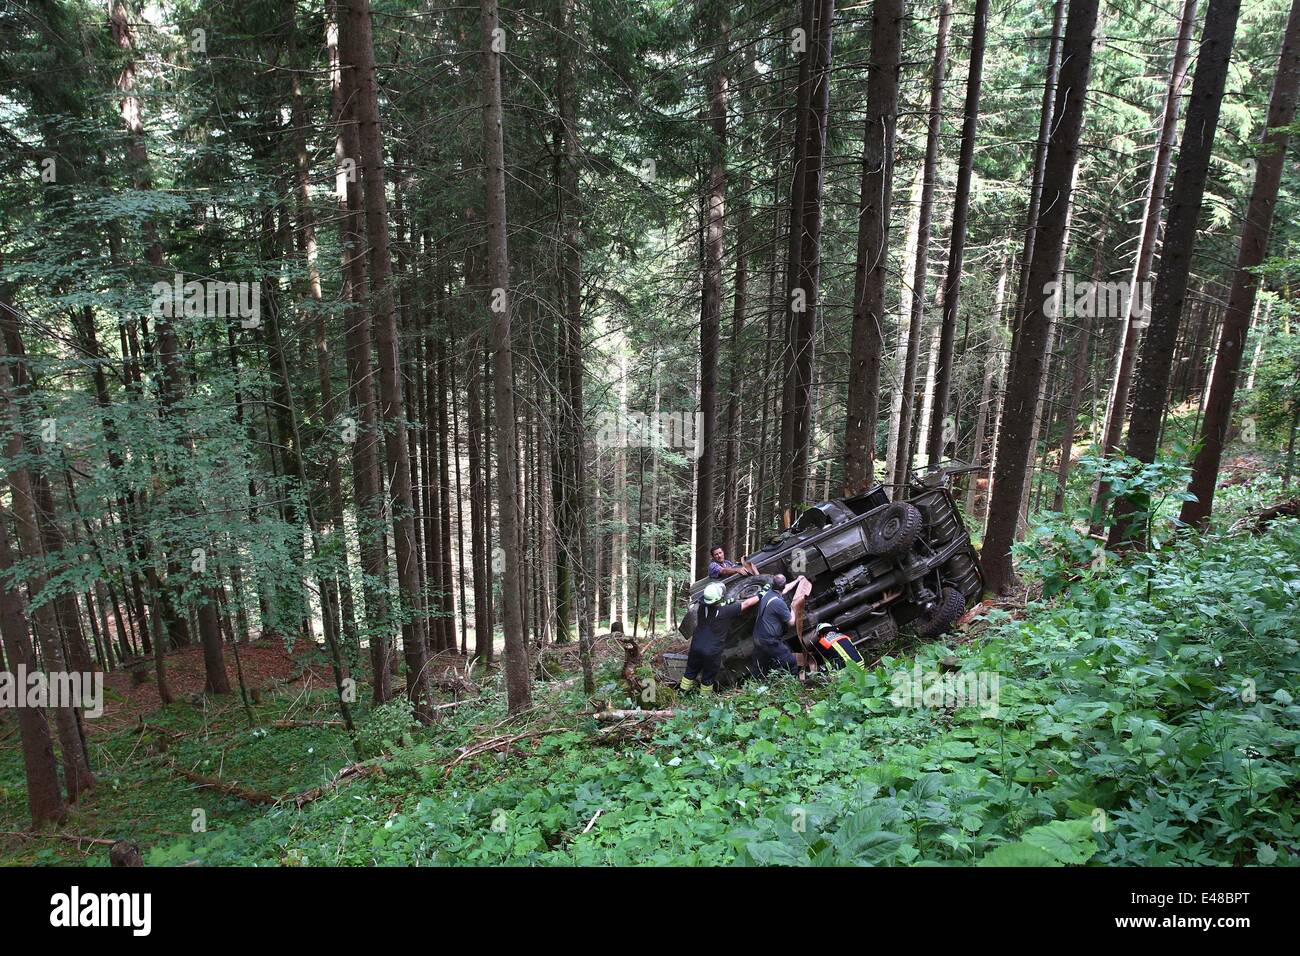 People work to free an SUV in the mountains near Oberstdorf, Germany, 05 July 2014. Several people were in the car when is went off the road and crashed down a cliff. One person was killed in the accident. Photo: KARL-JOSEF HILDENBRAND/dpa Stock Photo